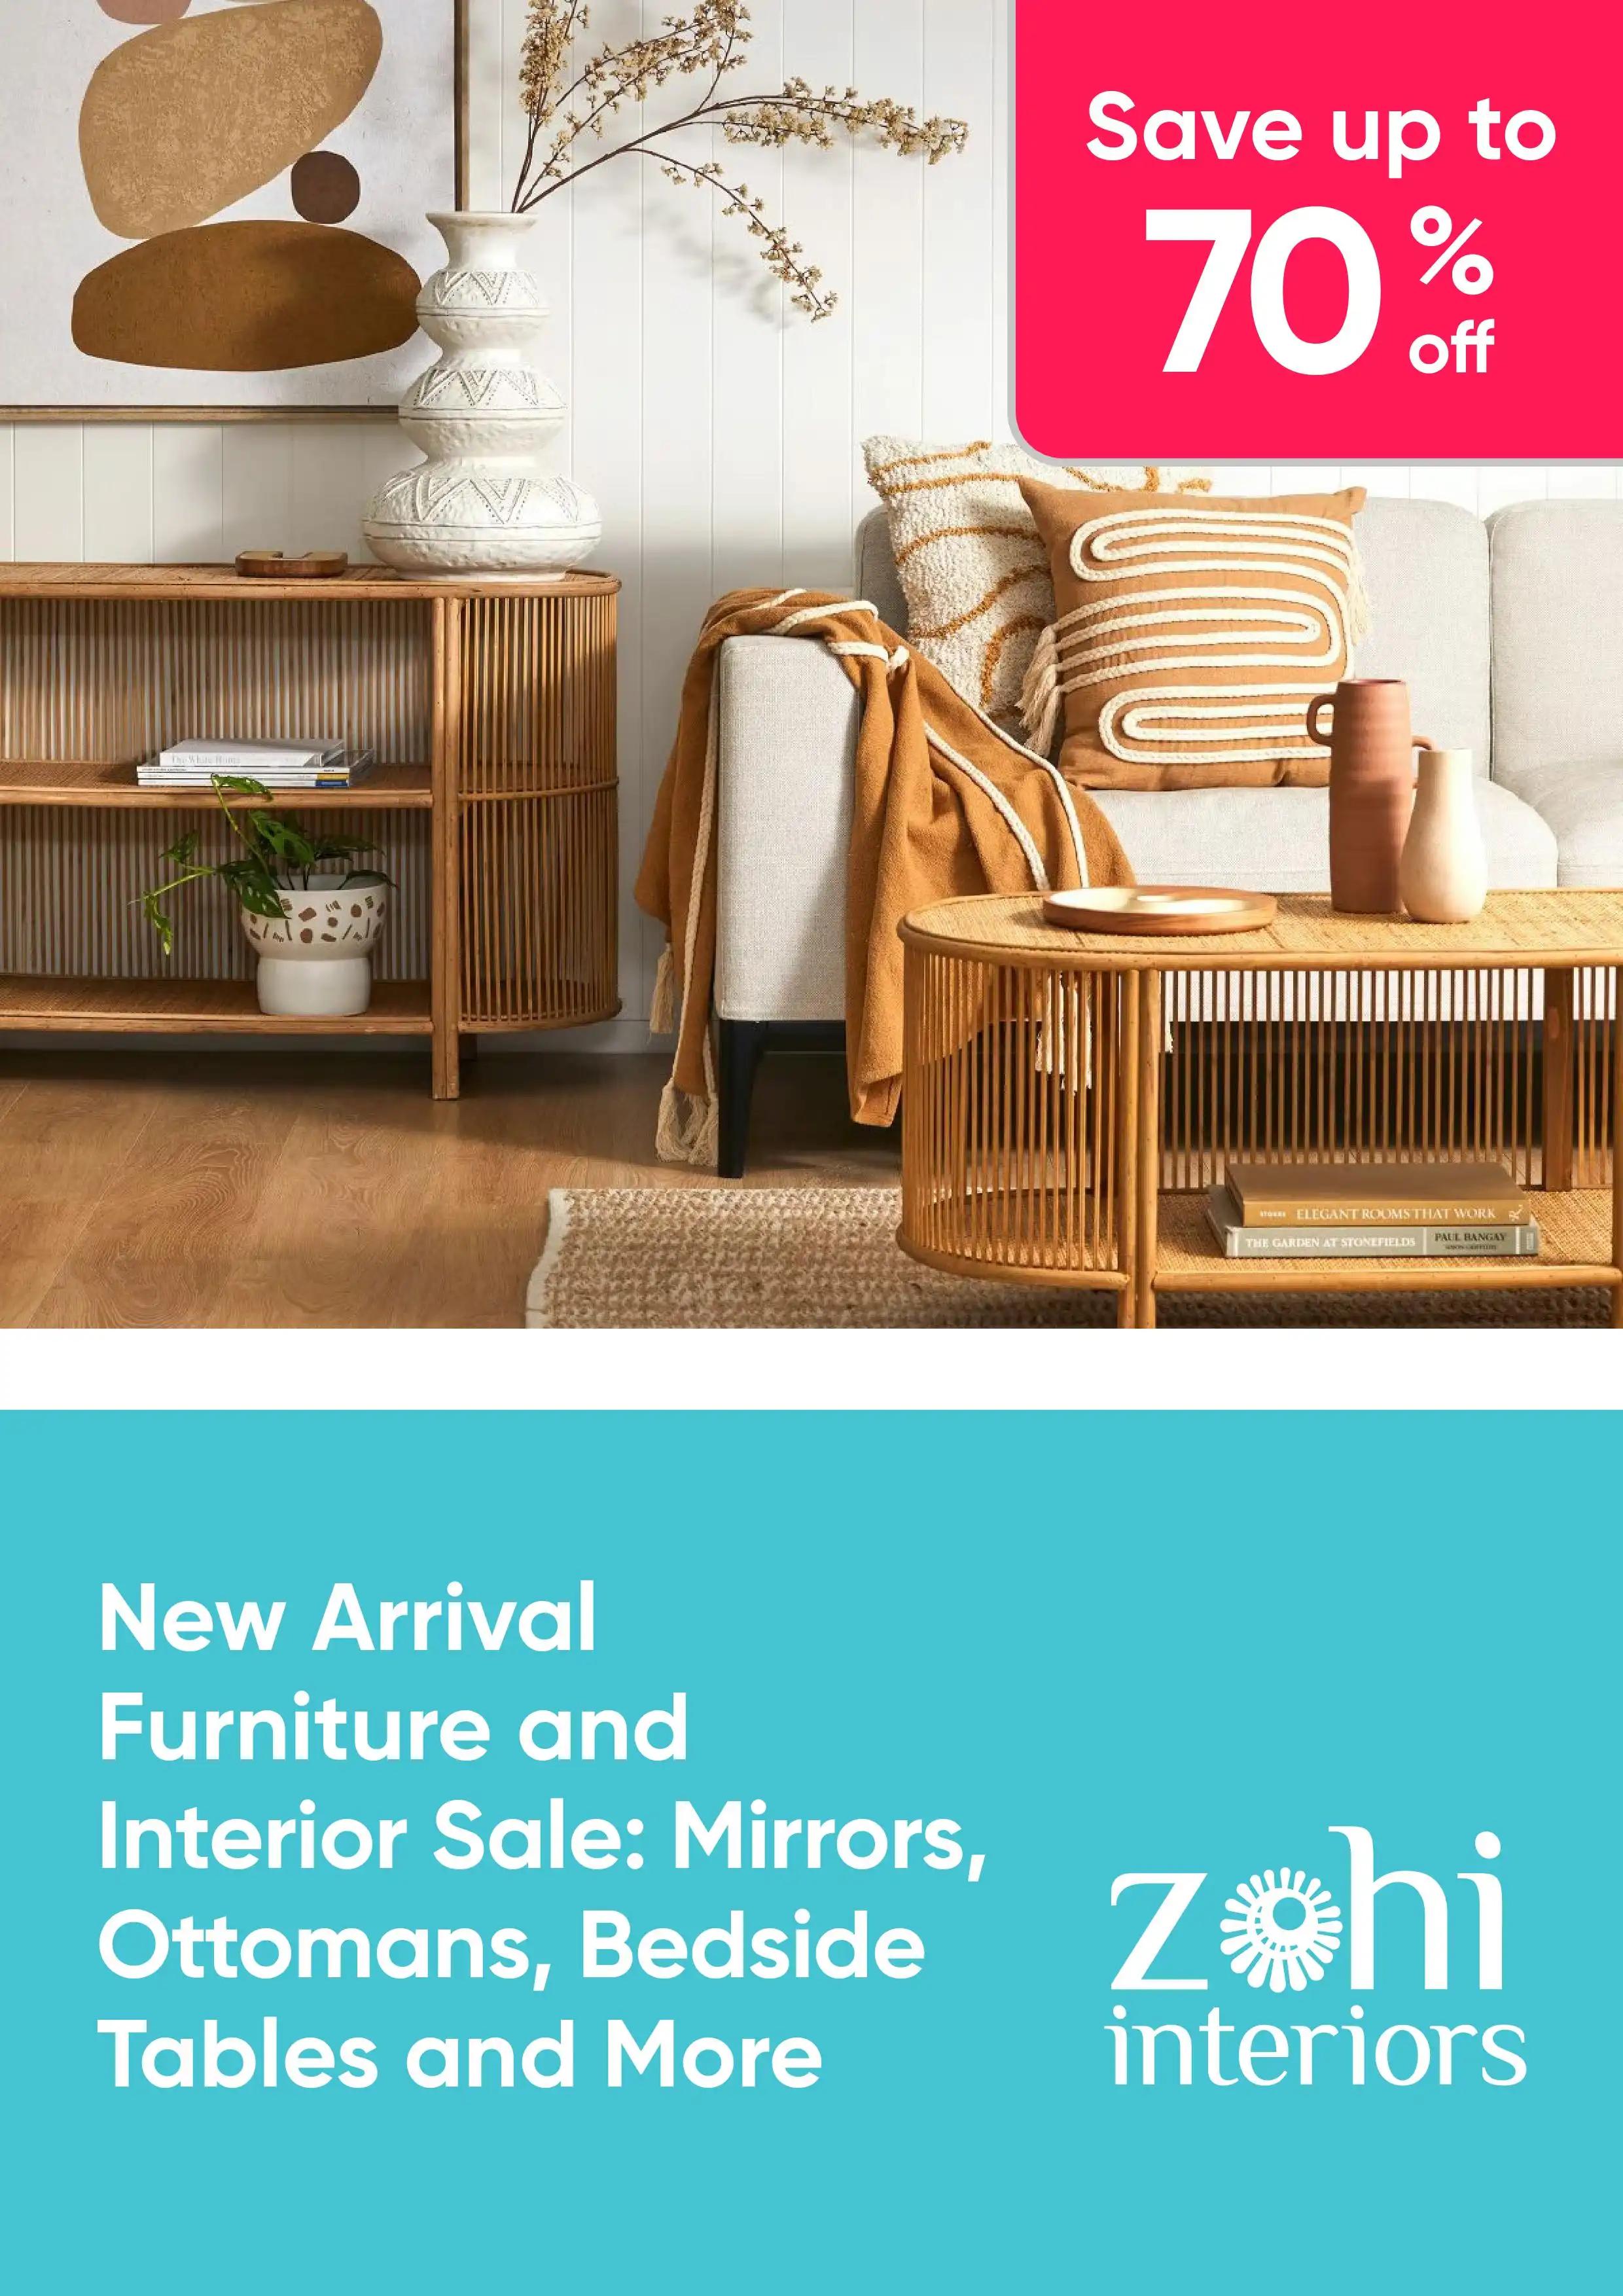 New Arrival Furniture and Interior Sale: Mirrors, Ottomans, Bedside Tables and More – up to 70% off